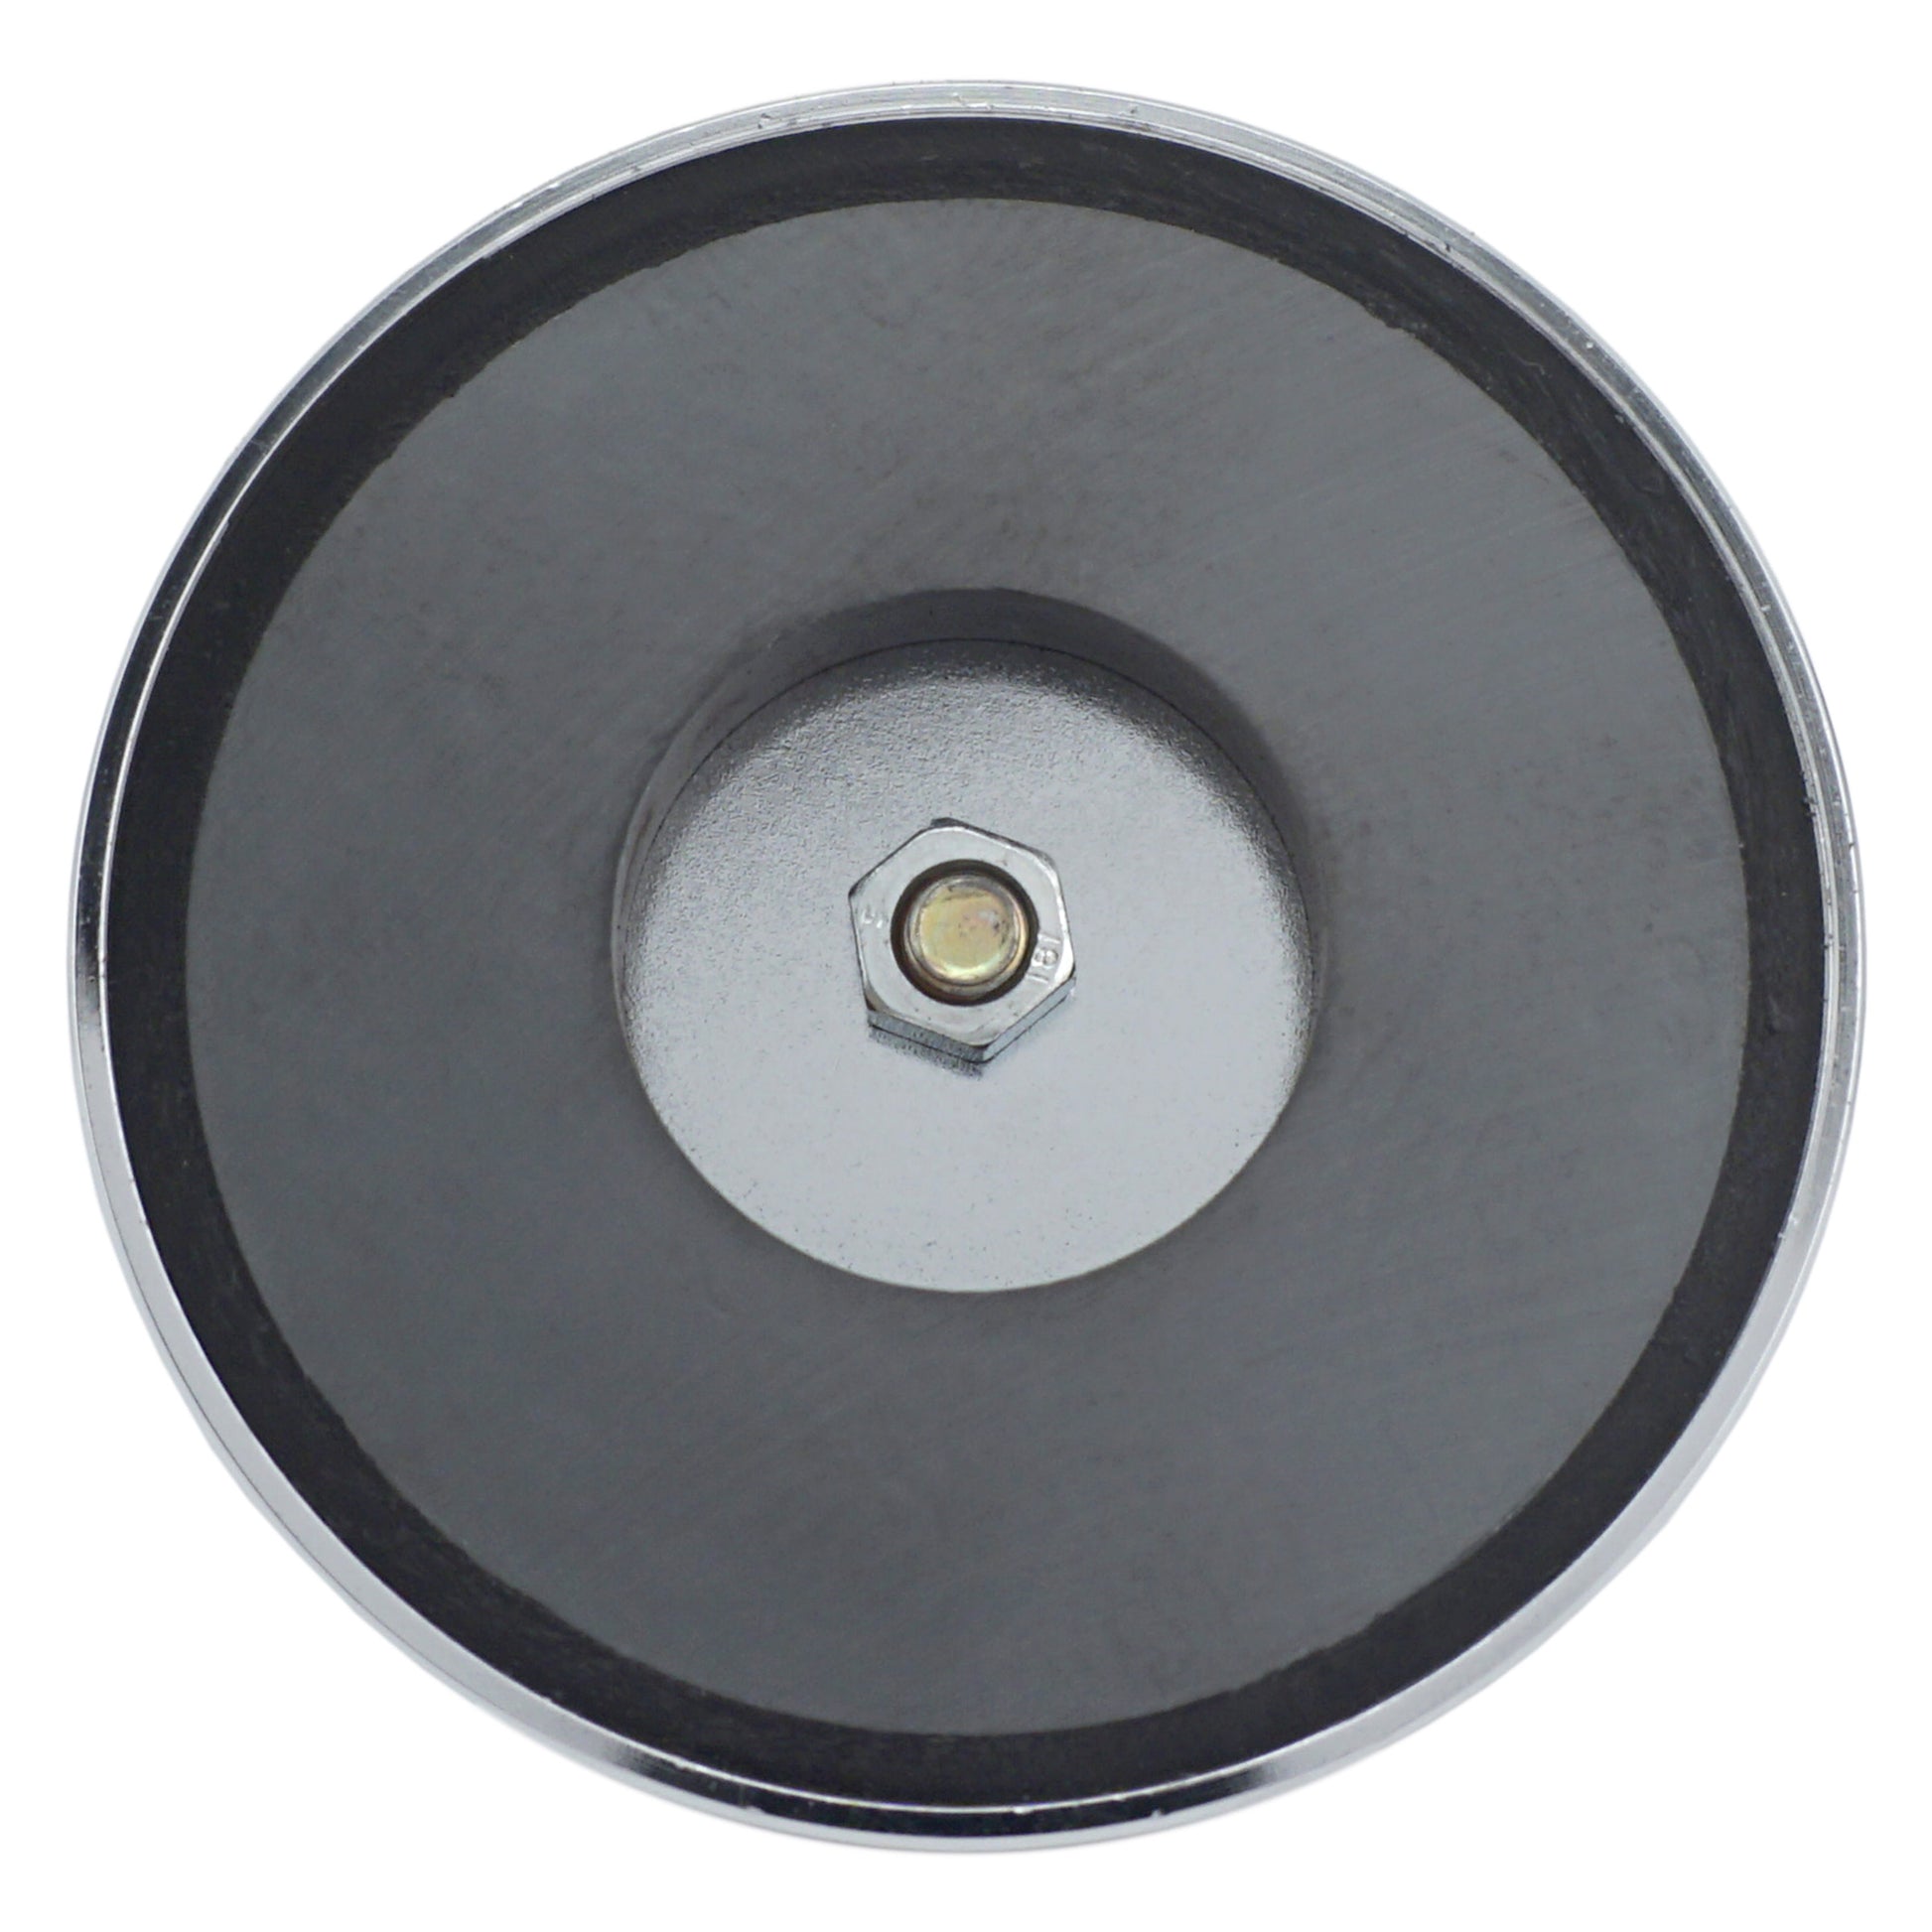 Load image into Gallery viewer, HMKR-80 Ceramic Round Base Magnet with Knob - Specifications